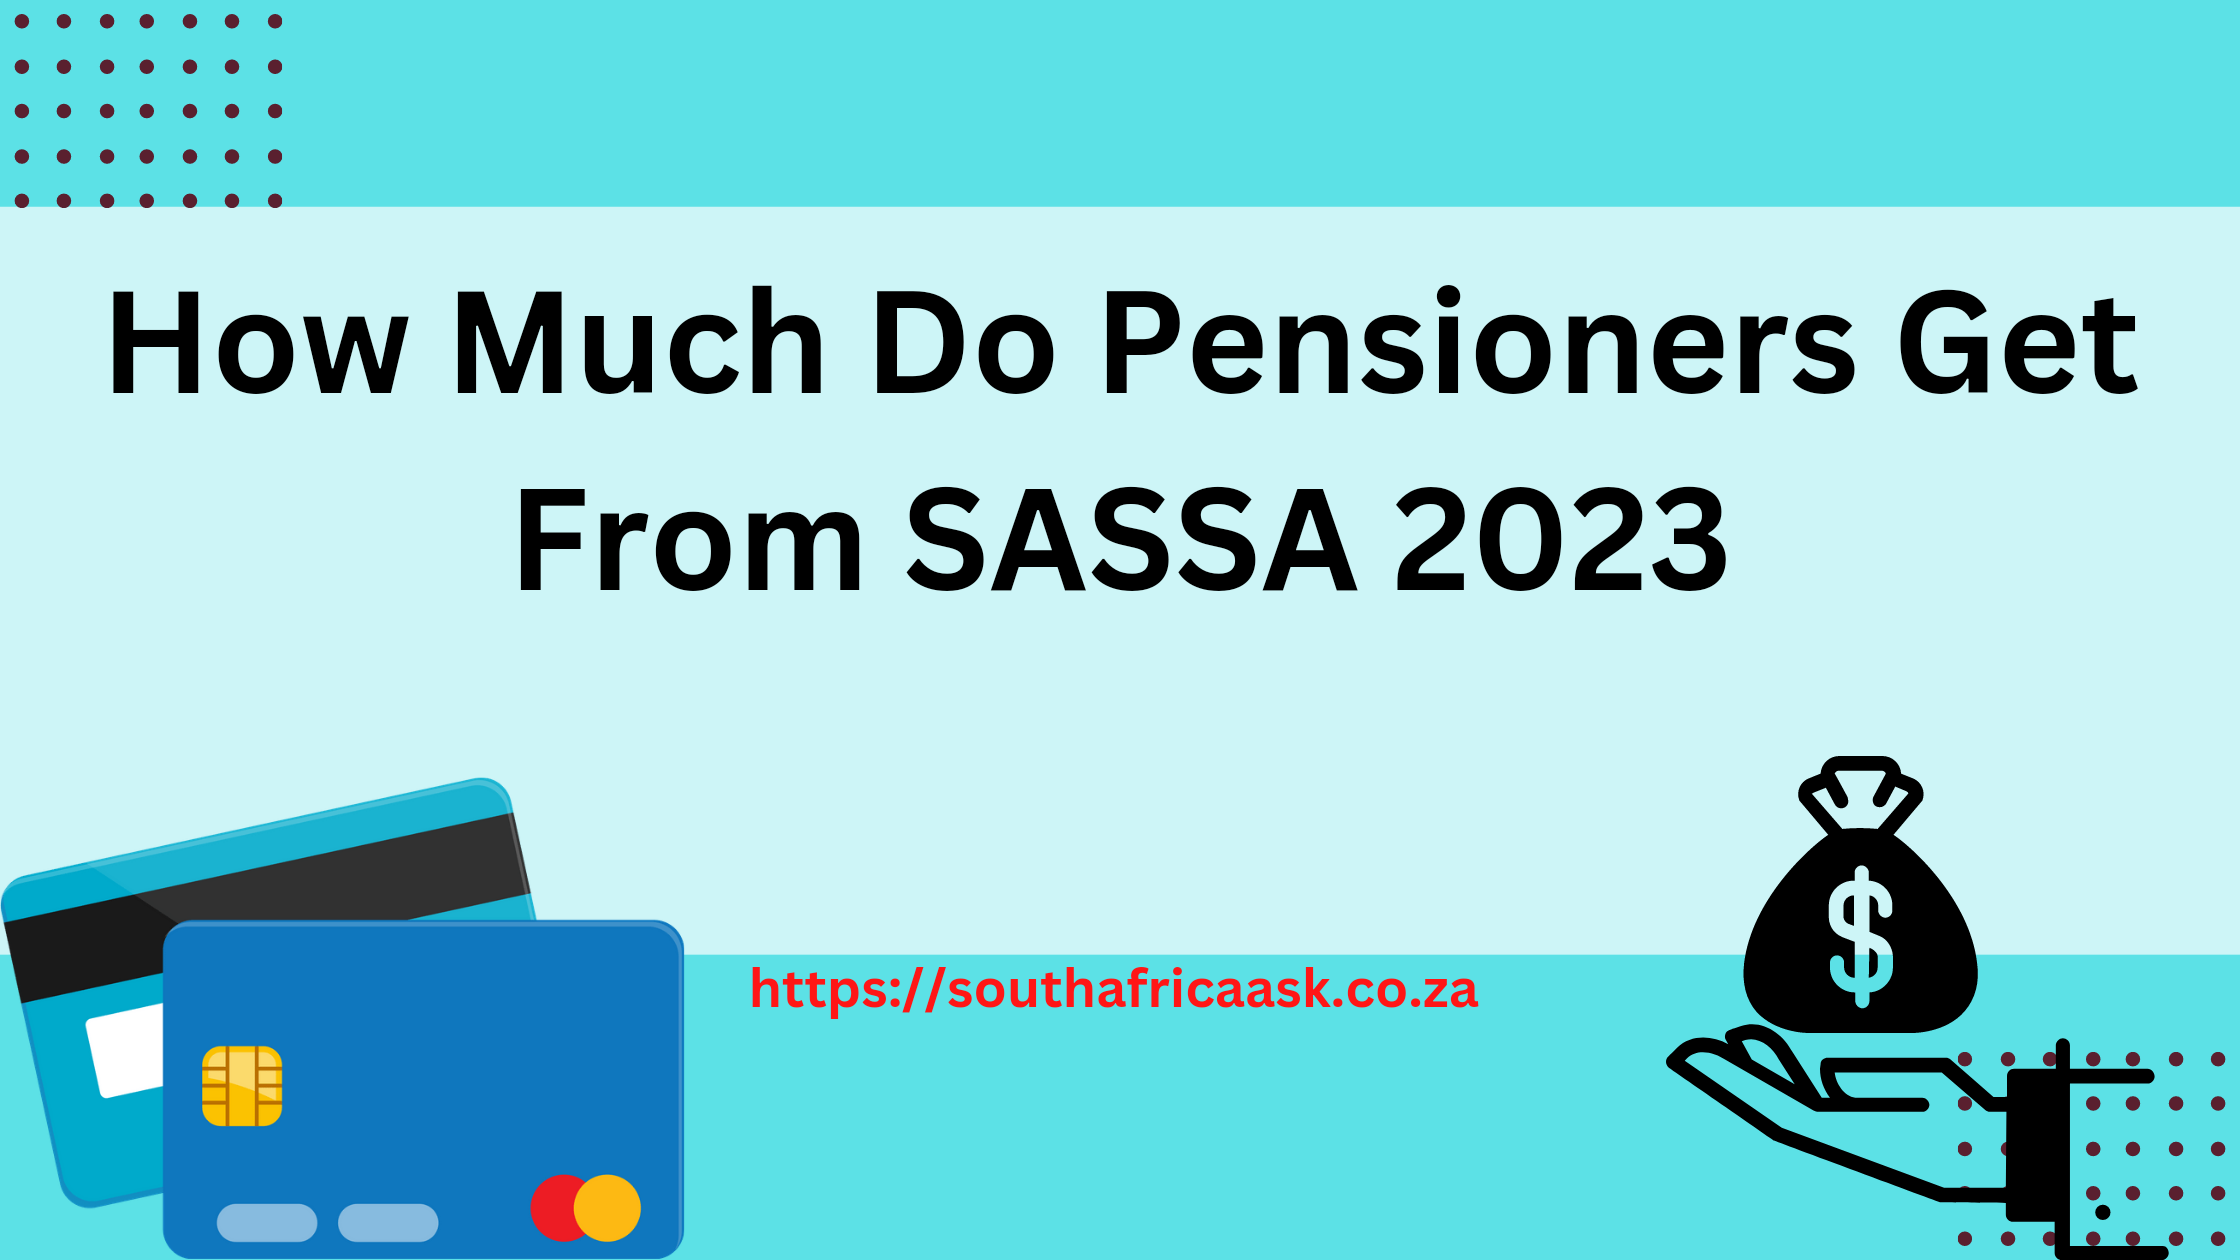 How Much Do Pensioners Get From SASSA 2023